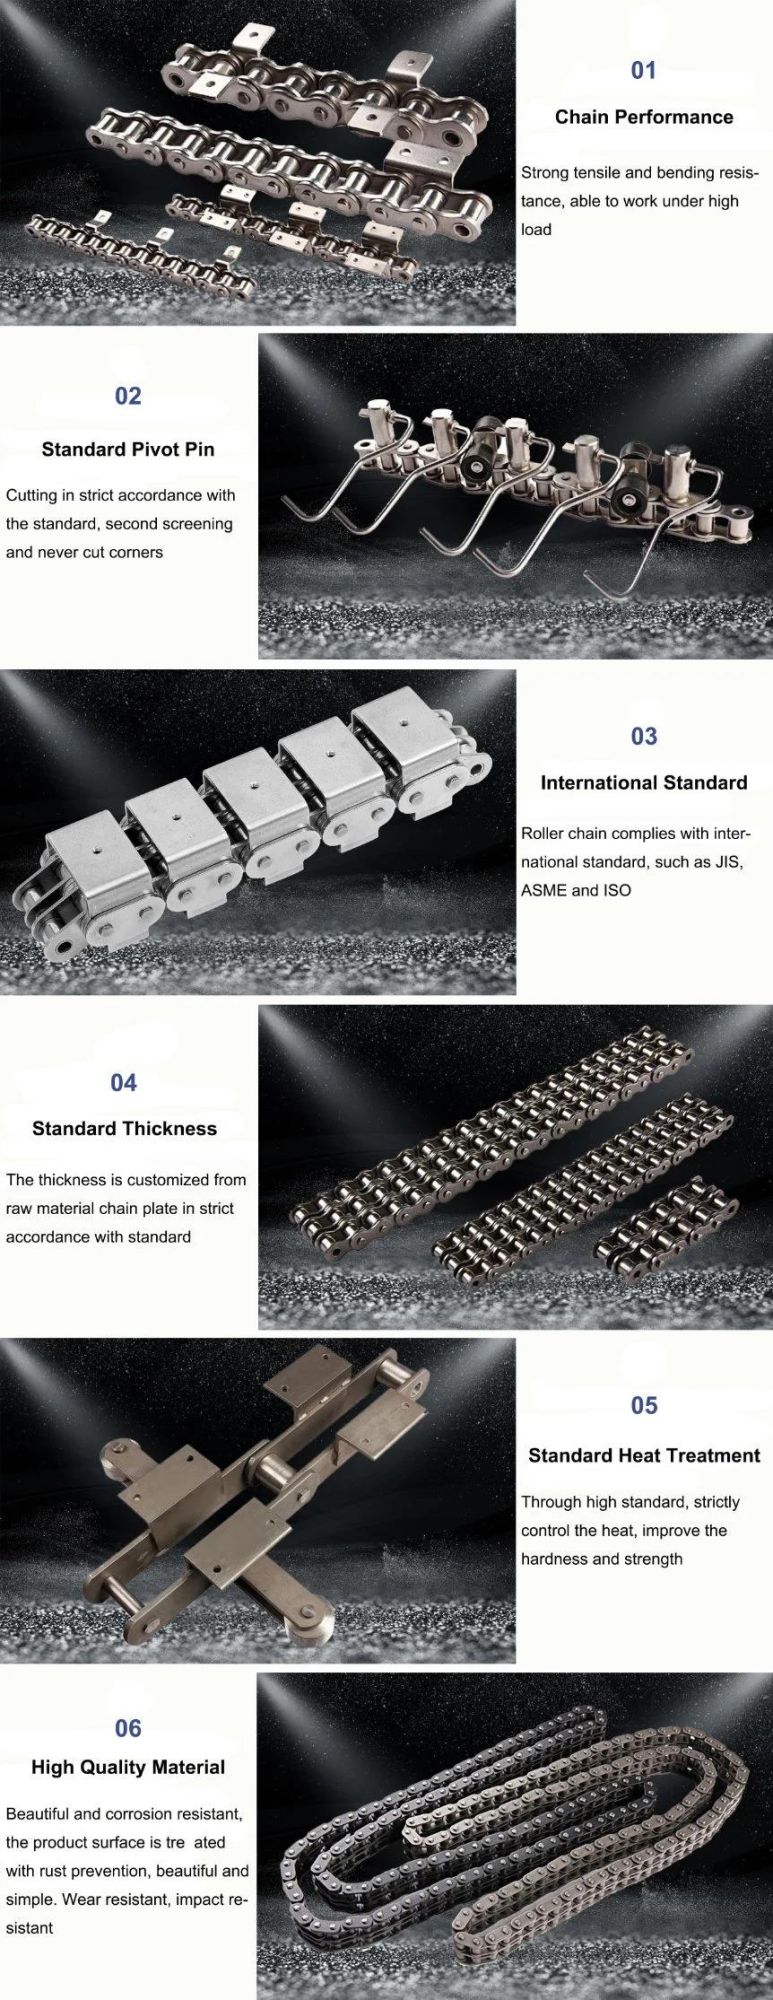 Anti-Corrosion Stainless Steel SUS304 Conveyor Welded Flat Top Transmission Roller Chain